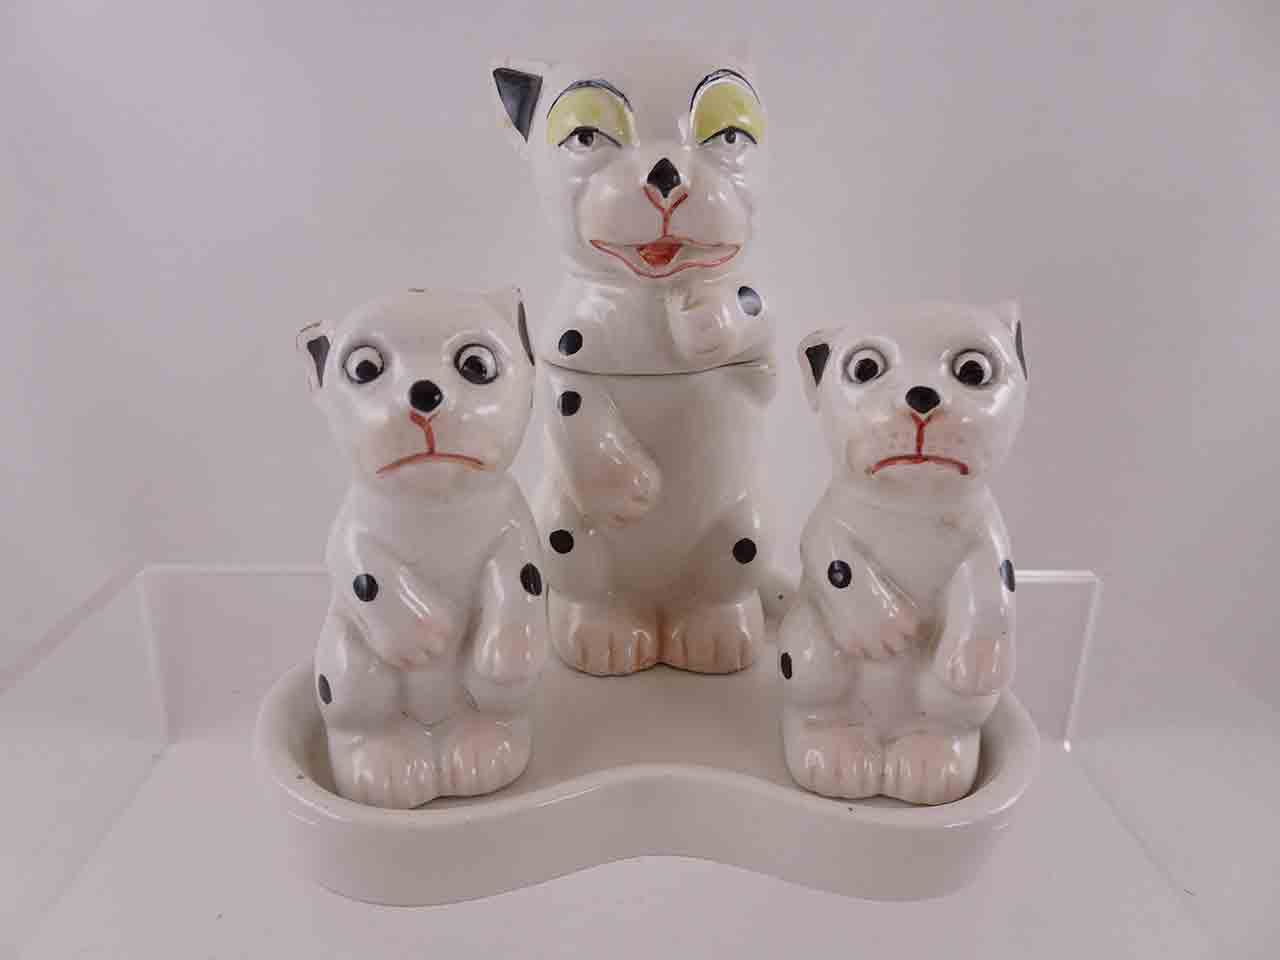 Bonzo dog condiment salt and pepper shaker set from Italy